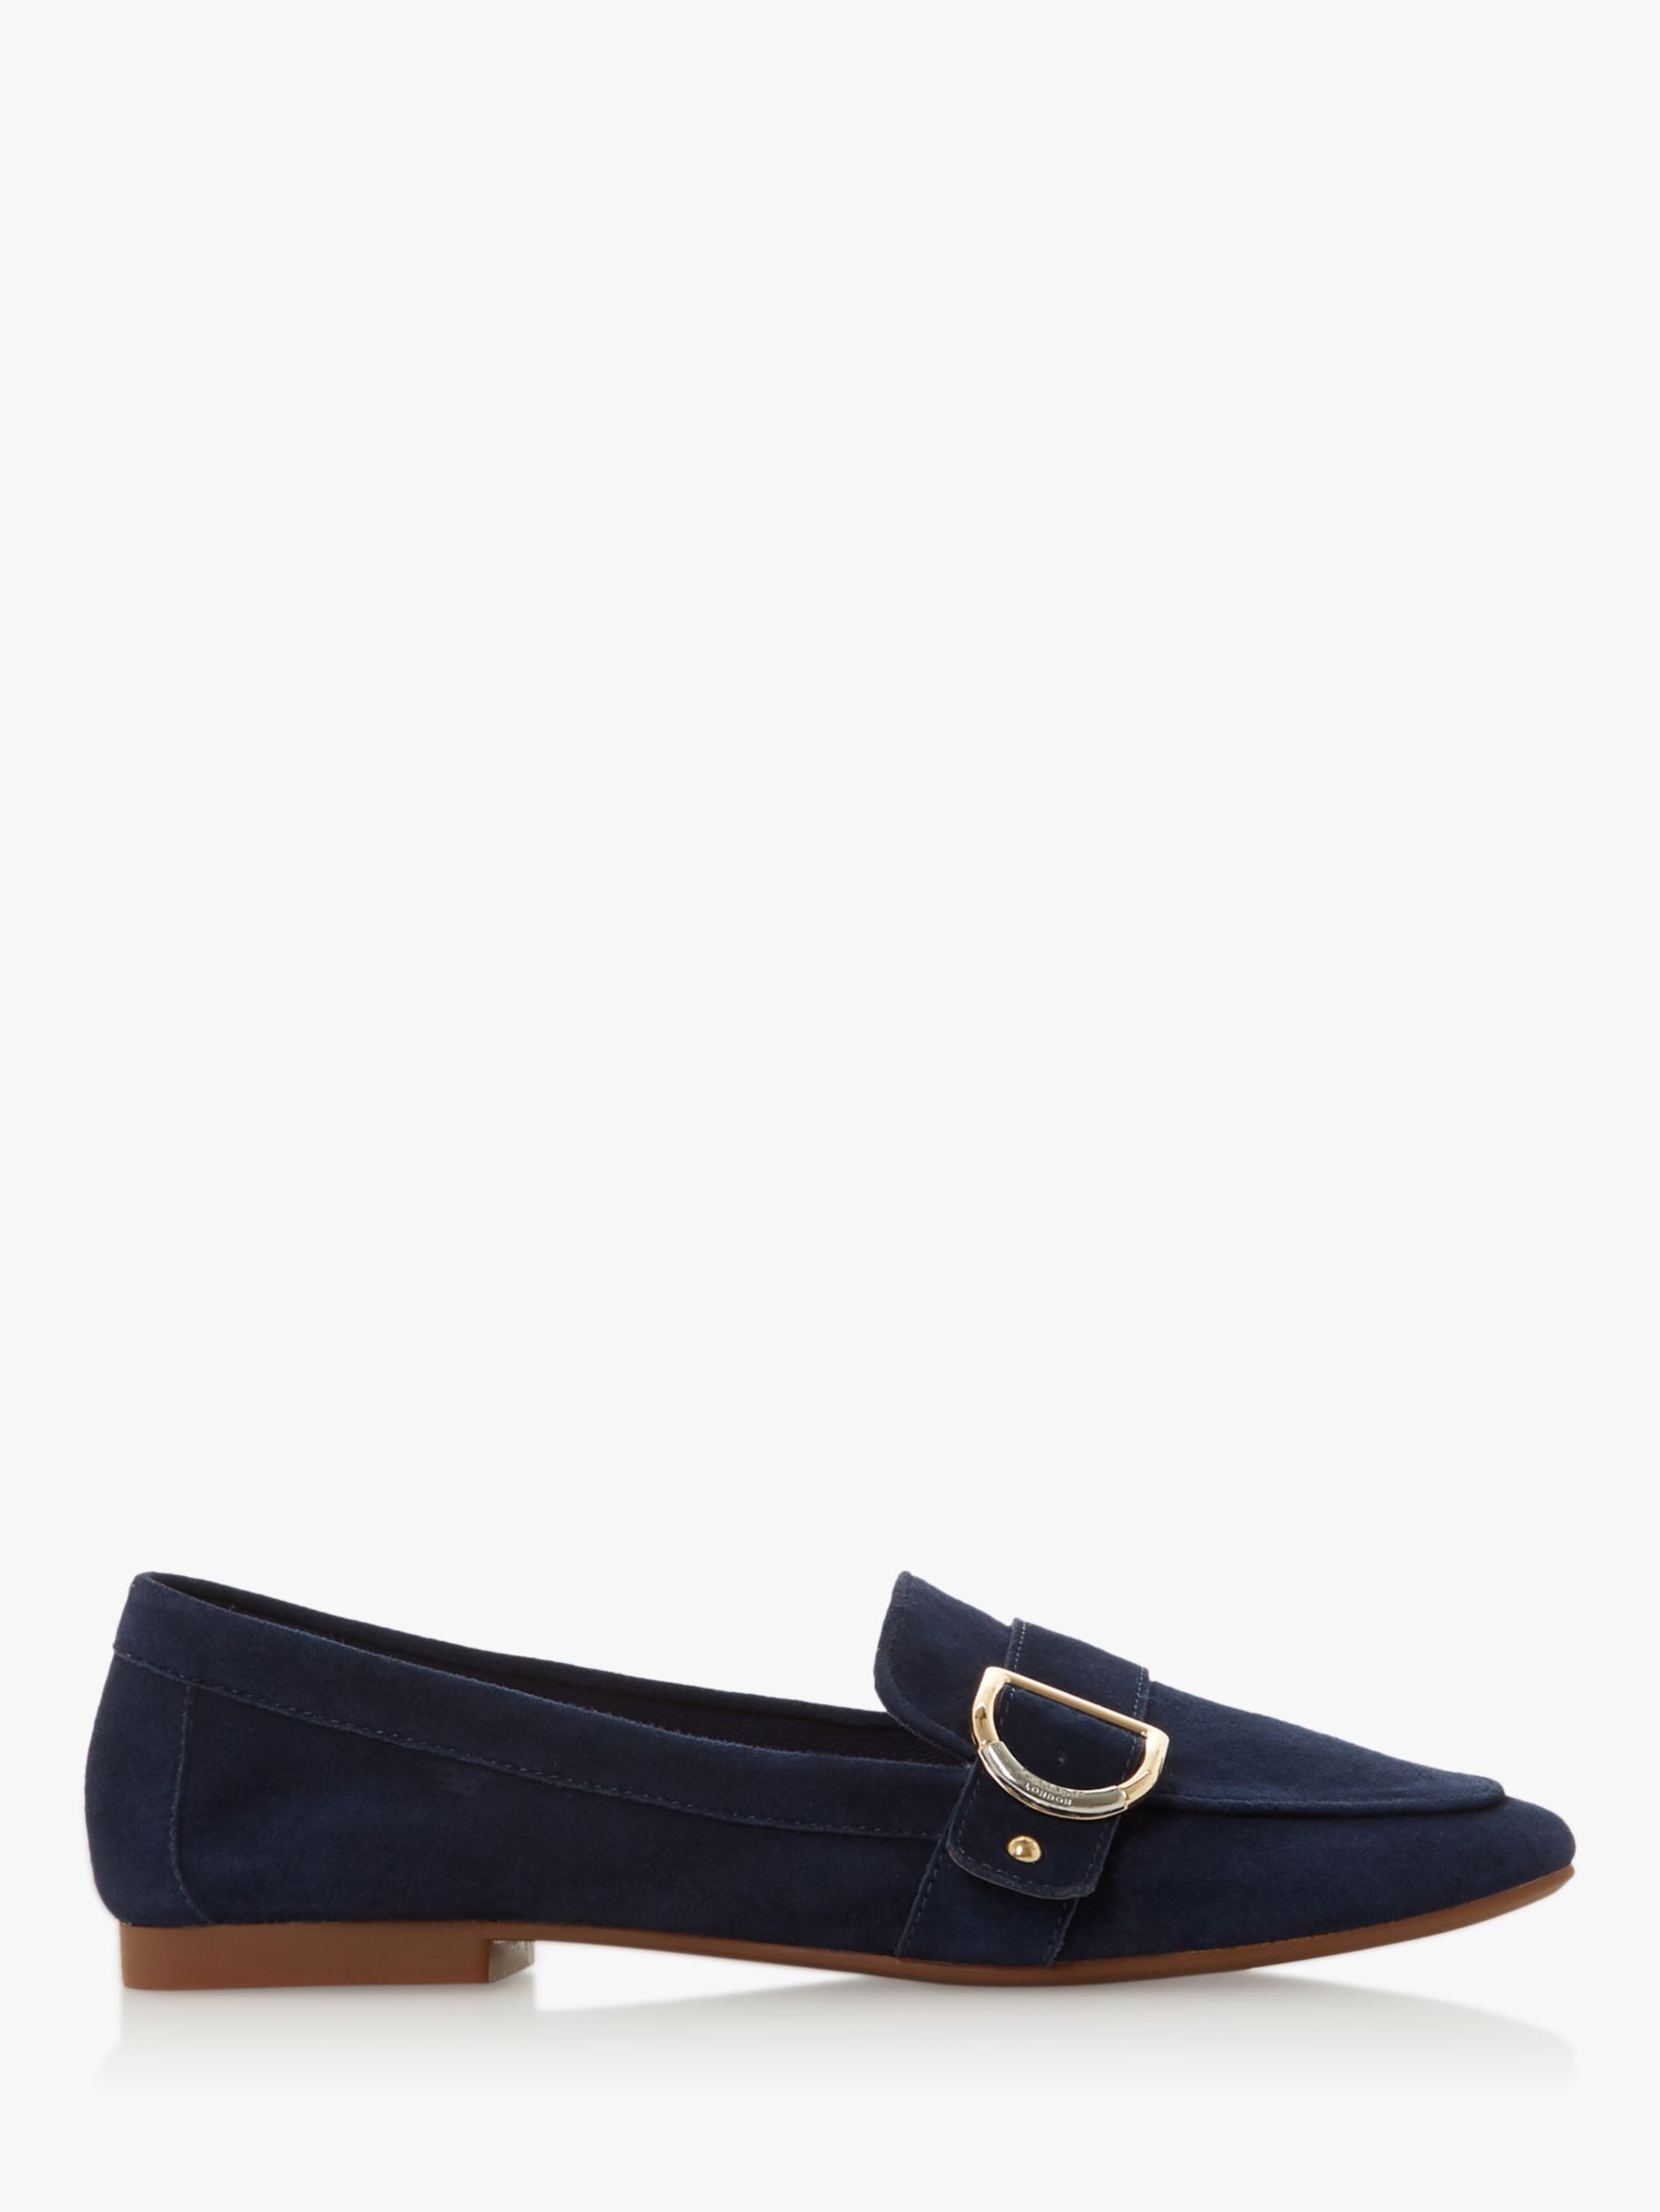 Dune Graysy Buckle Loafers